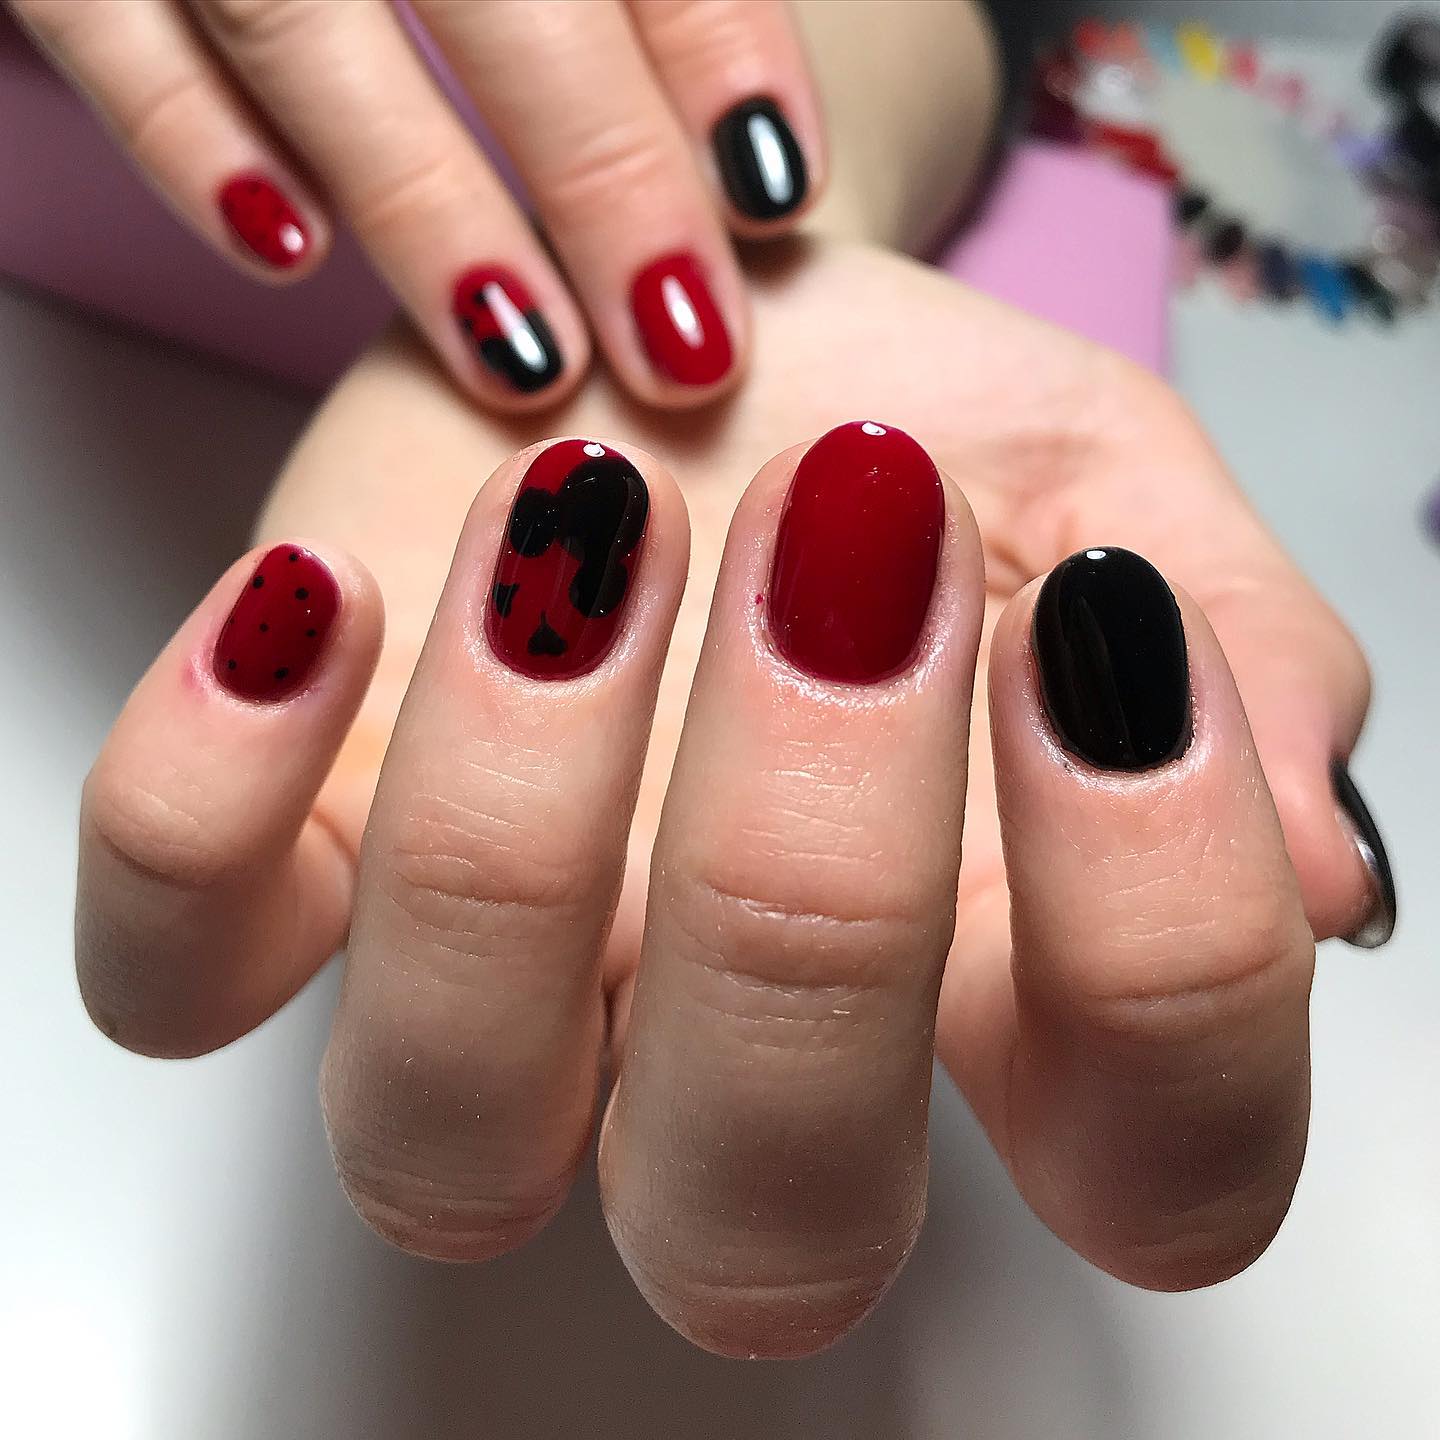 We see Mickey designs everywhere, so why not using them as a nail art? If you want to have a Mickey with you on your nail, black and red nail colors are perfect for you. Let's give it a shot.